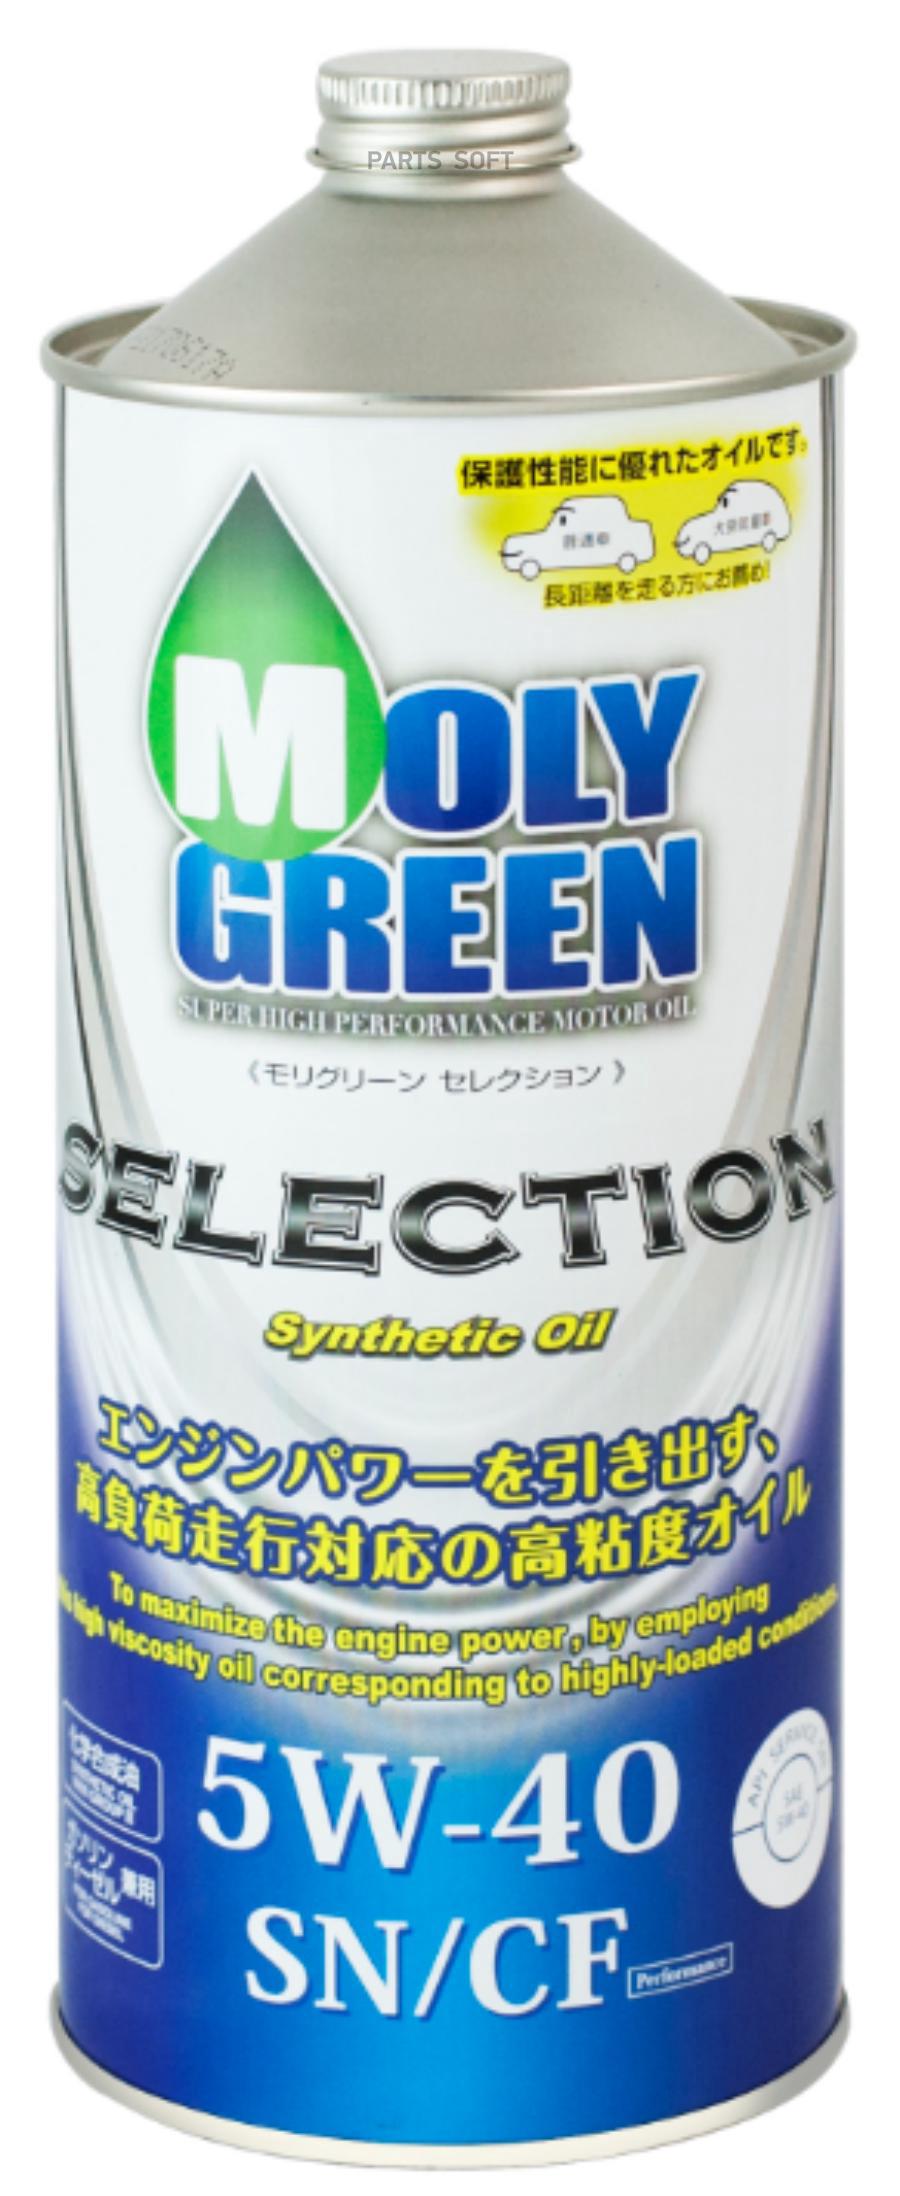 Moly green 5w40. Moly Green selection 5w40. Масло моли Грин 5w30. Масло Молли Грин 5w40. Moly Green selection SN/gf-5 5w40.